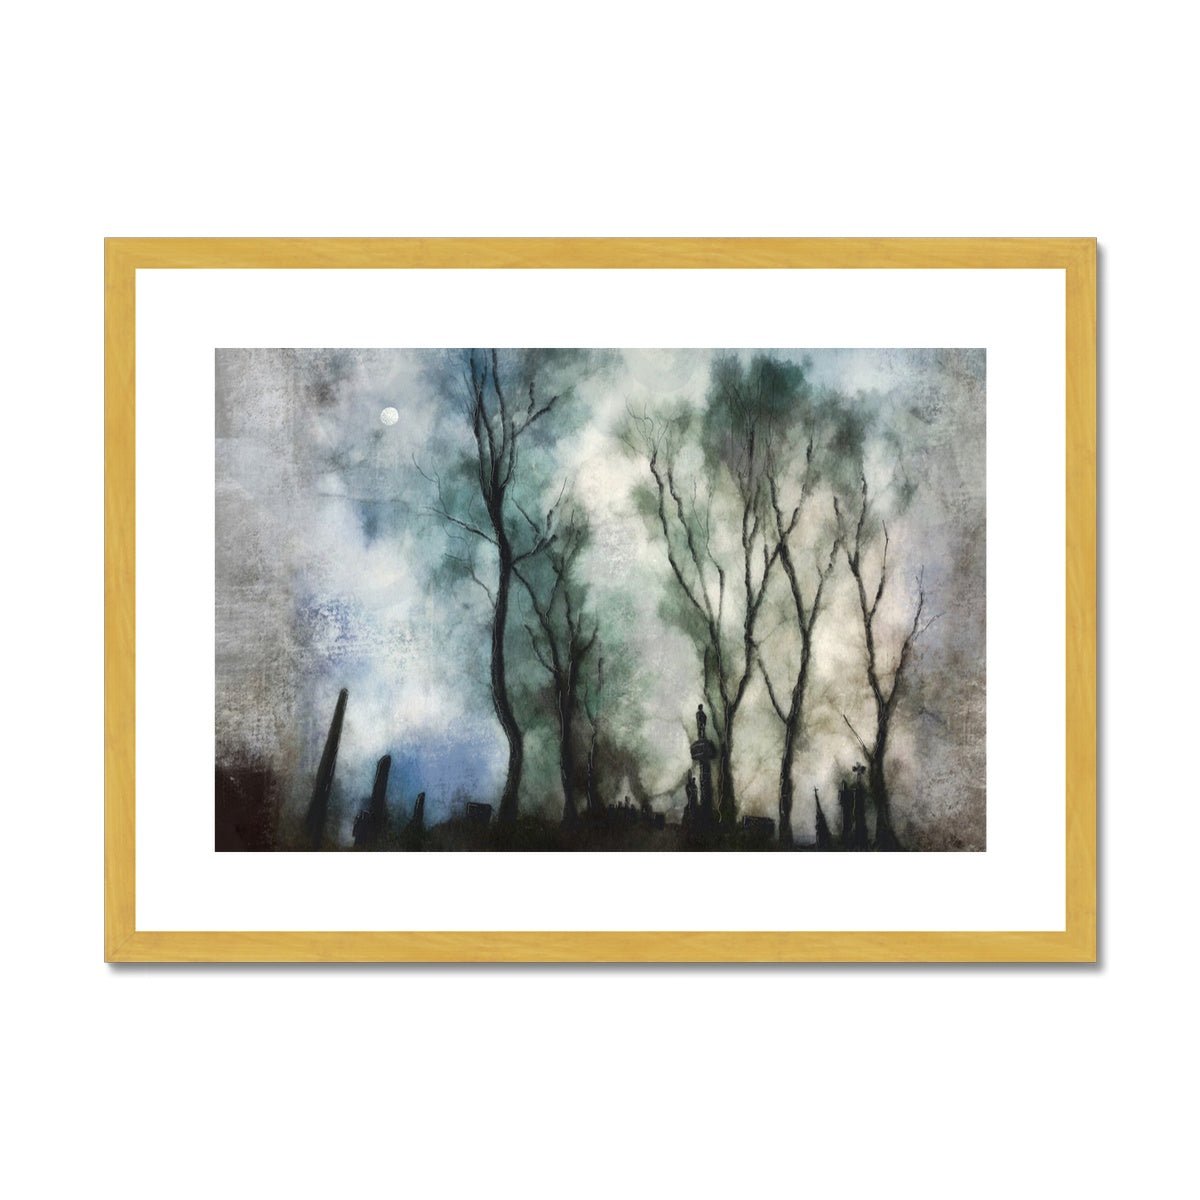 Glasgow Necropolis Moonlight Painting | Antique Framed & Mounted Prints From Scotland-Antique Framed & Mounted Prints-Edinburgh & Glasgow Art Gallery-A2 Landscape-Gold Frame-Paintings, Prints, Homeware, Art Gifts From Scotland By Scottish Artist Kevin Hunter